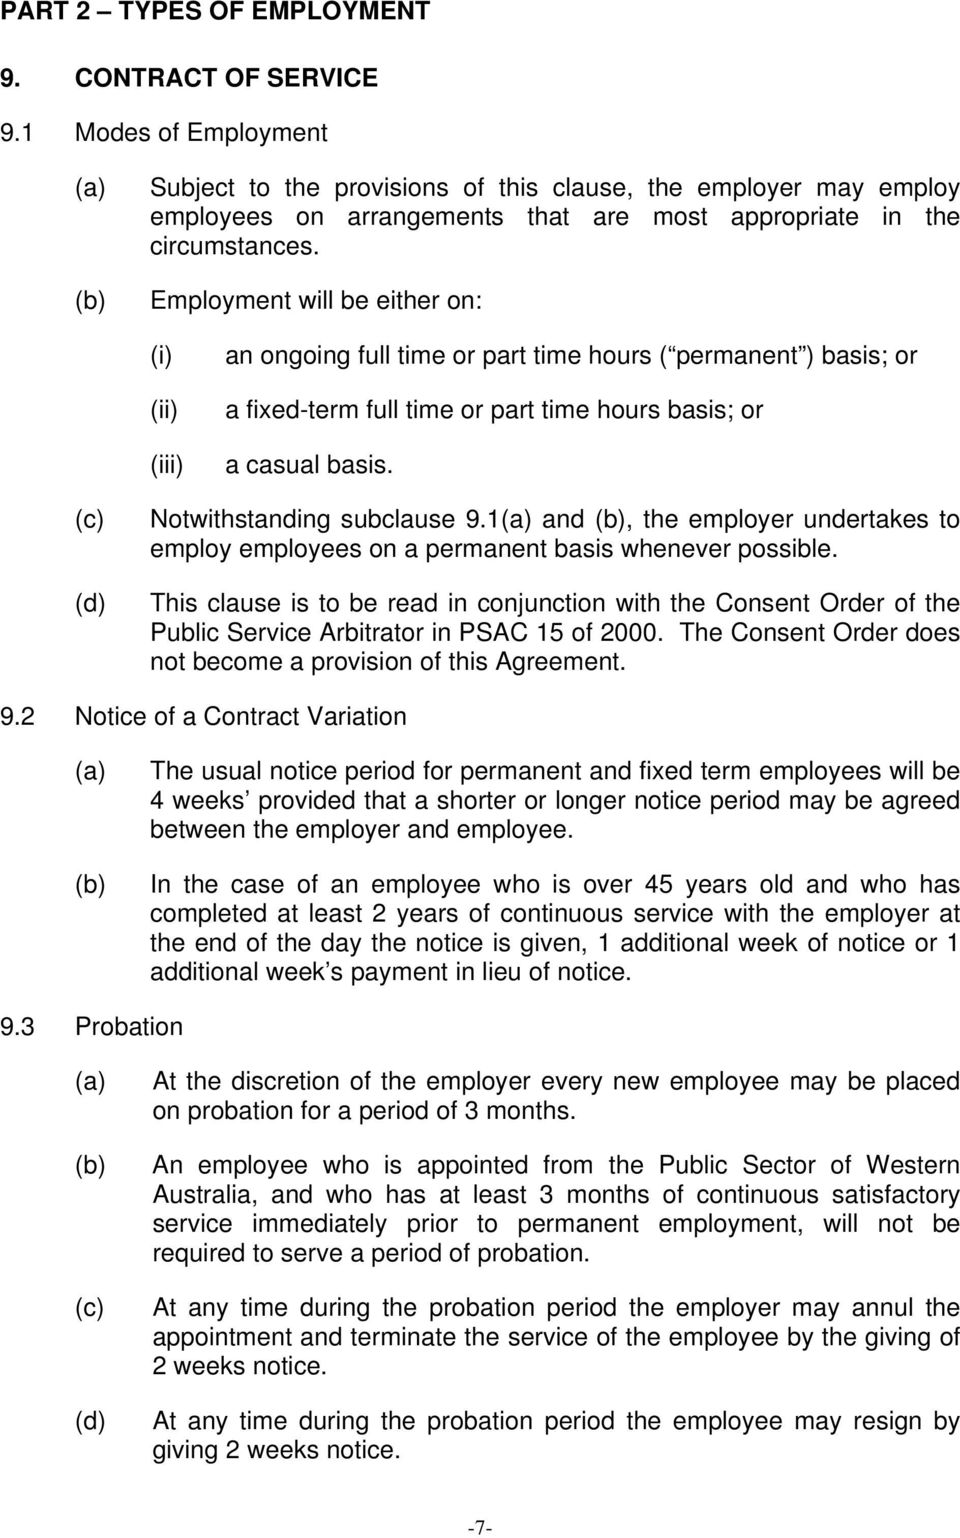 Employment will be either on: (iii) an ongoing full time or part time hours ( permanent ) basis; or a fixed-term full time or part time hours basis; or a casual basis. Notwithstanding subclause 9.